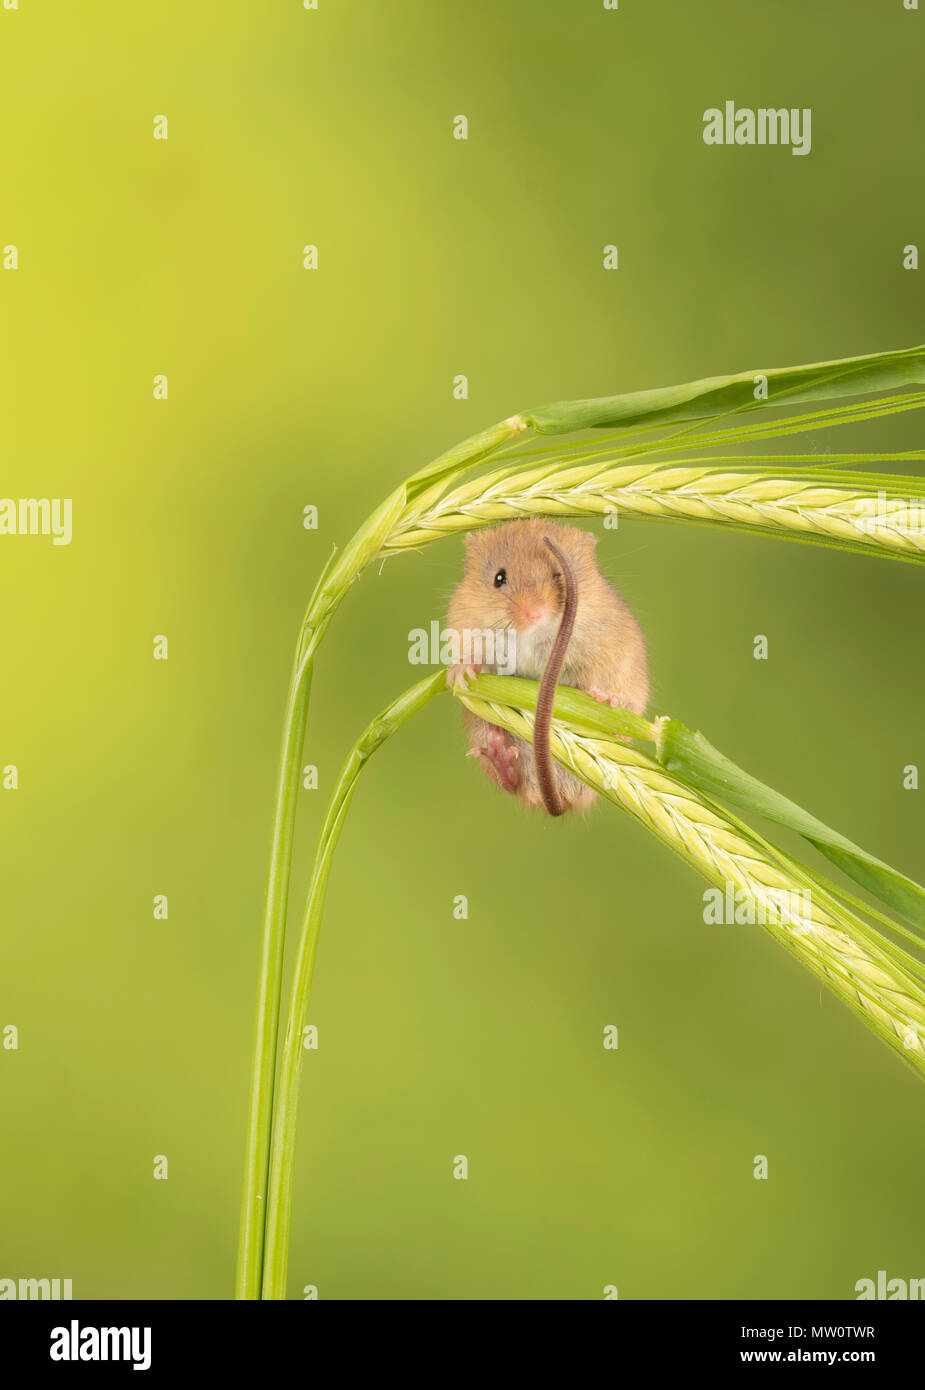 Harvest mouse climbing on grass blades Stock Photo